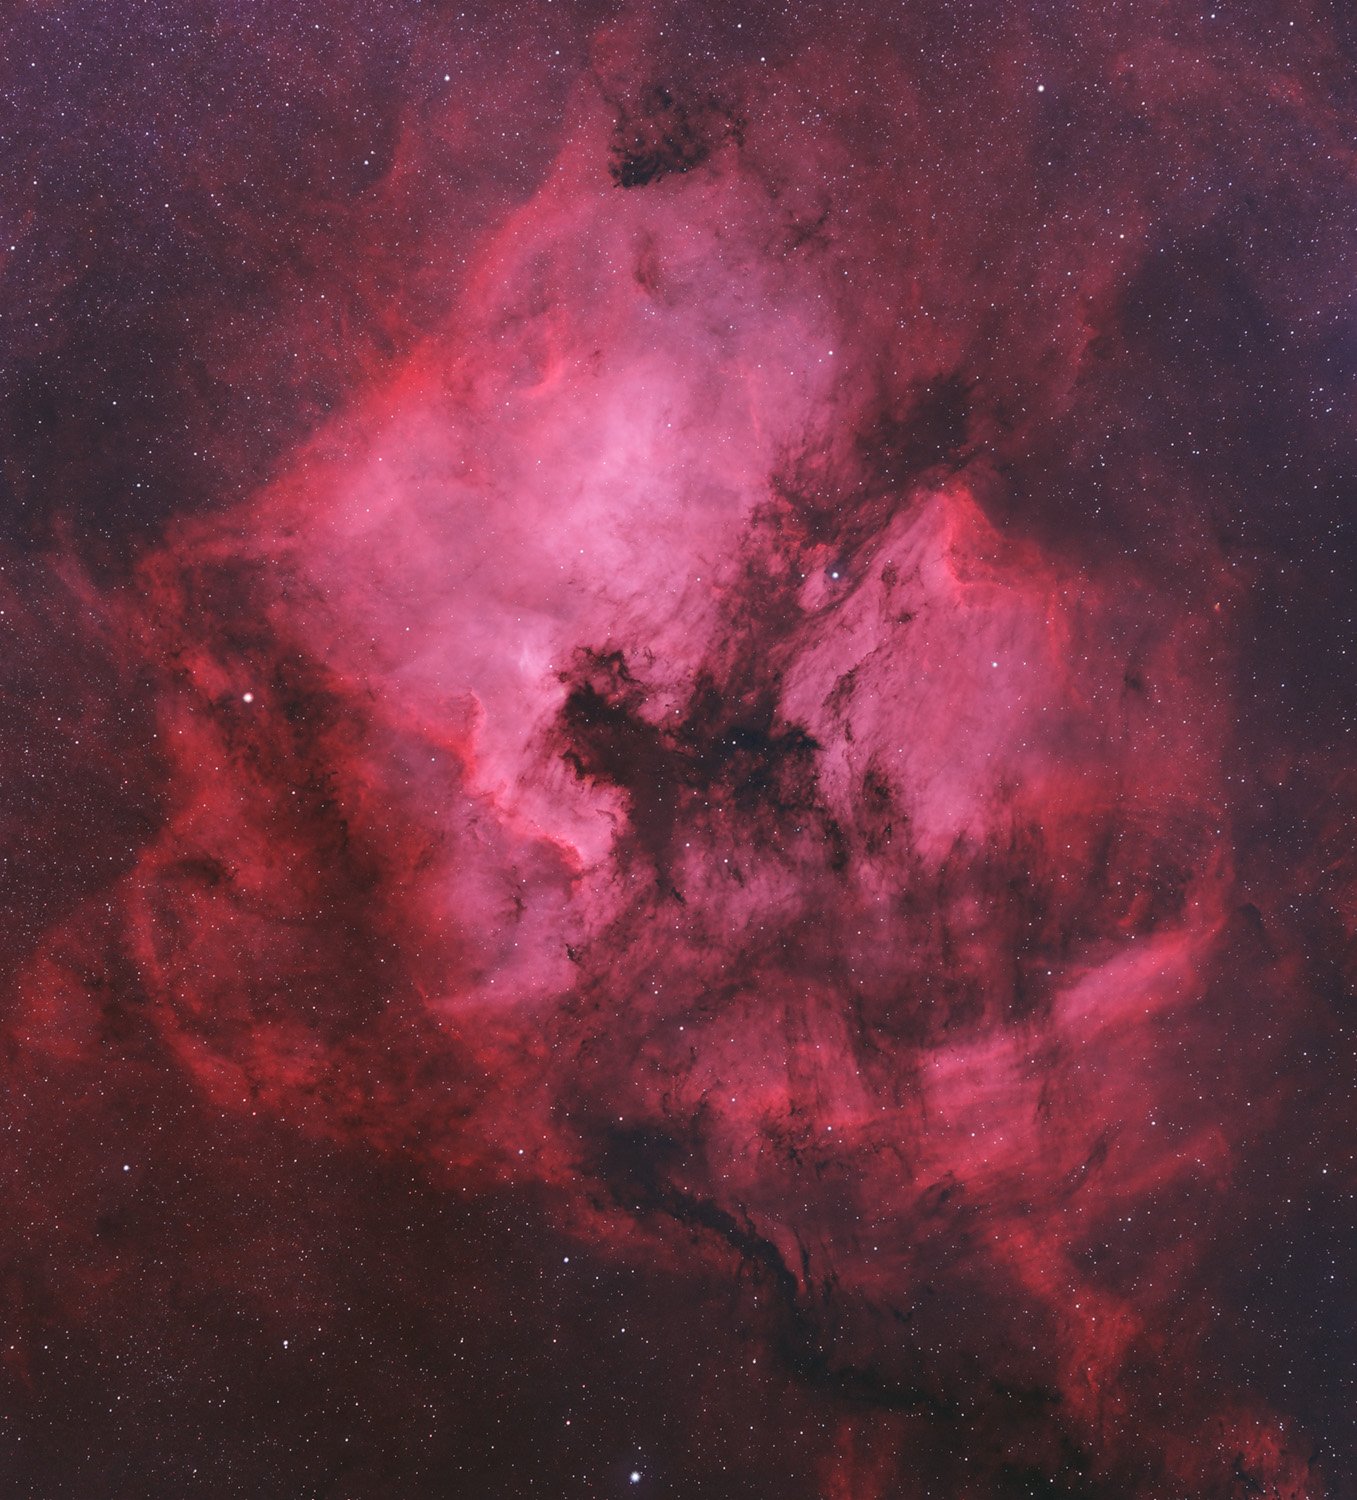 North America and Pelican Nebulae in RGB rendering of narrow band data